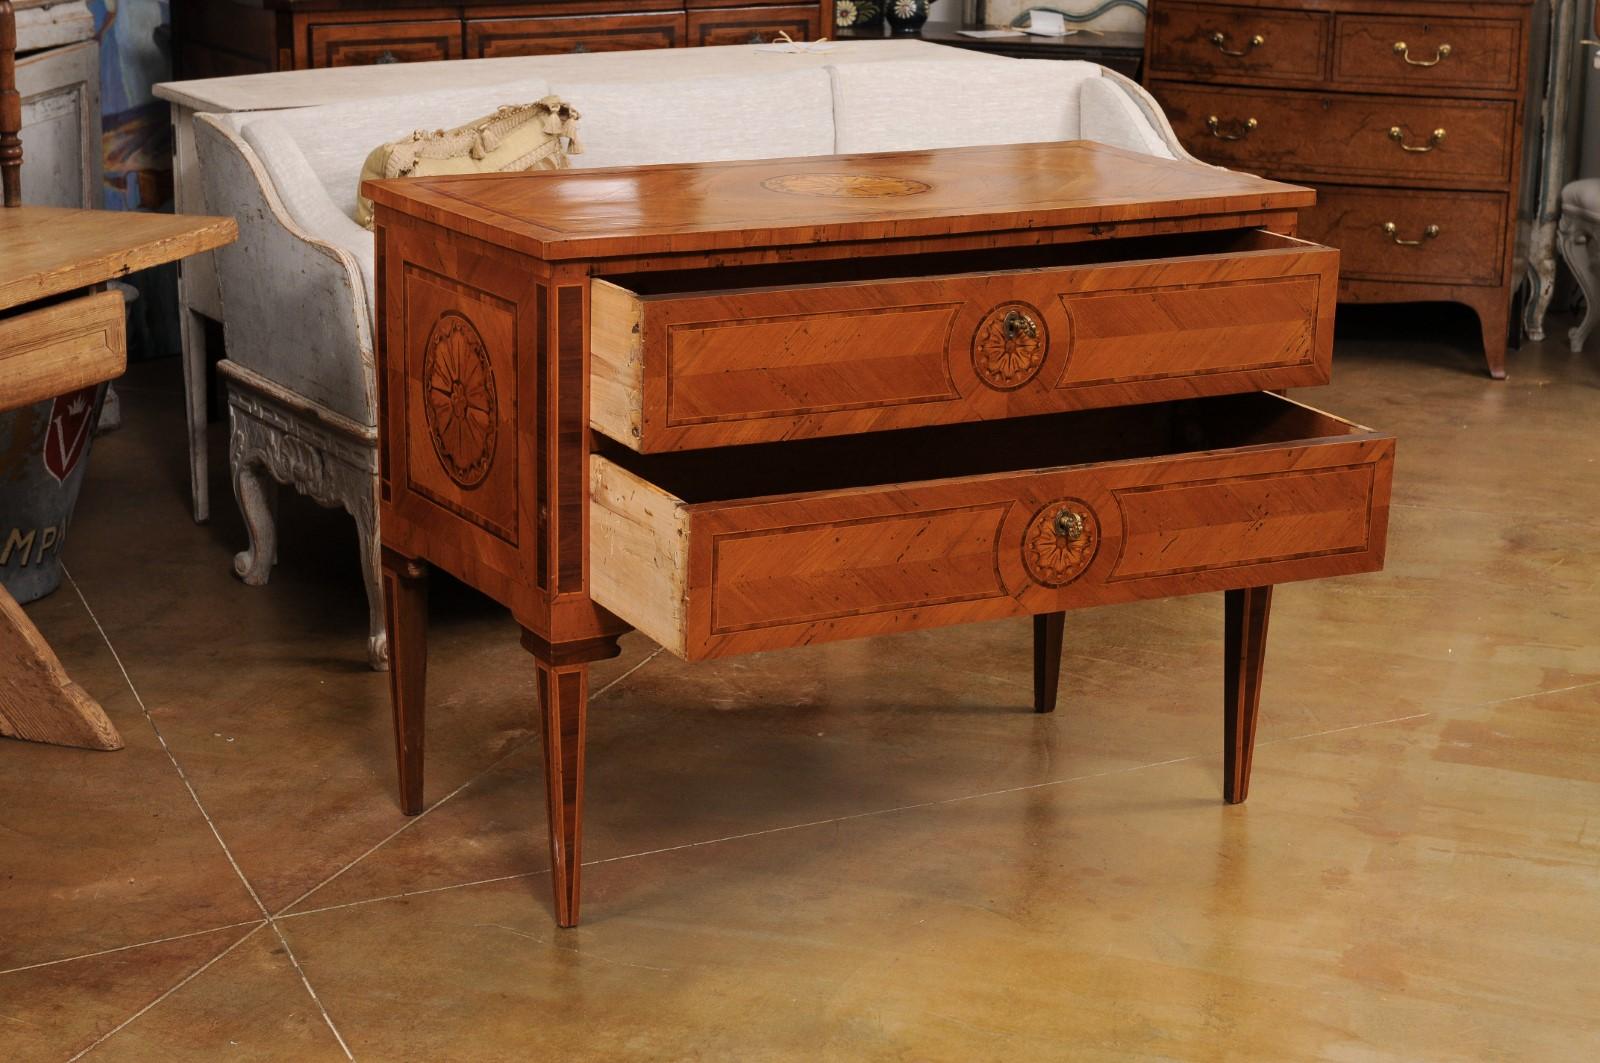 20th Century Italian Walnut and Mahogany Two-Drawer Commode with Marquetry, circa 1900